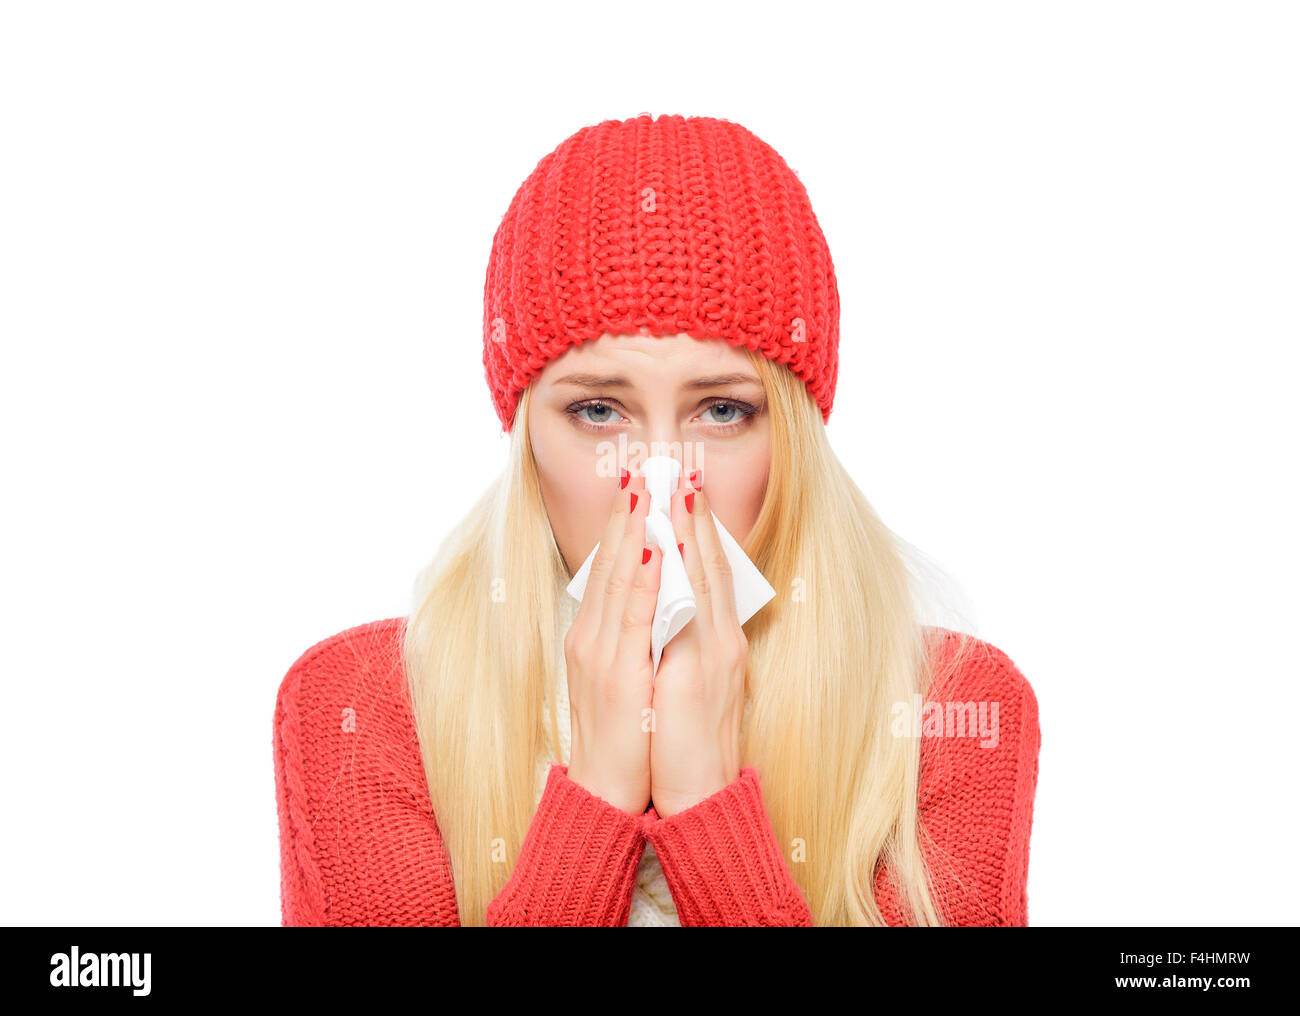 Runny nose of the girl. Stock Photo